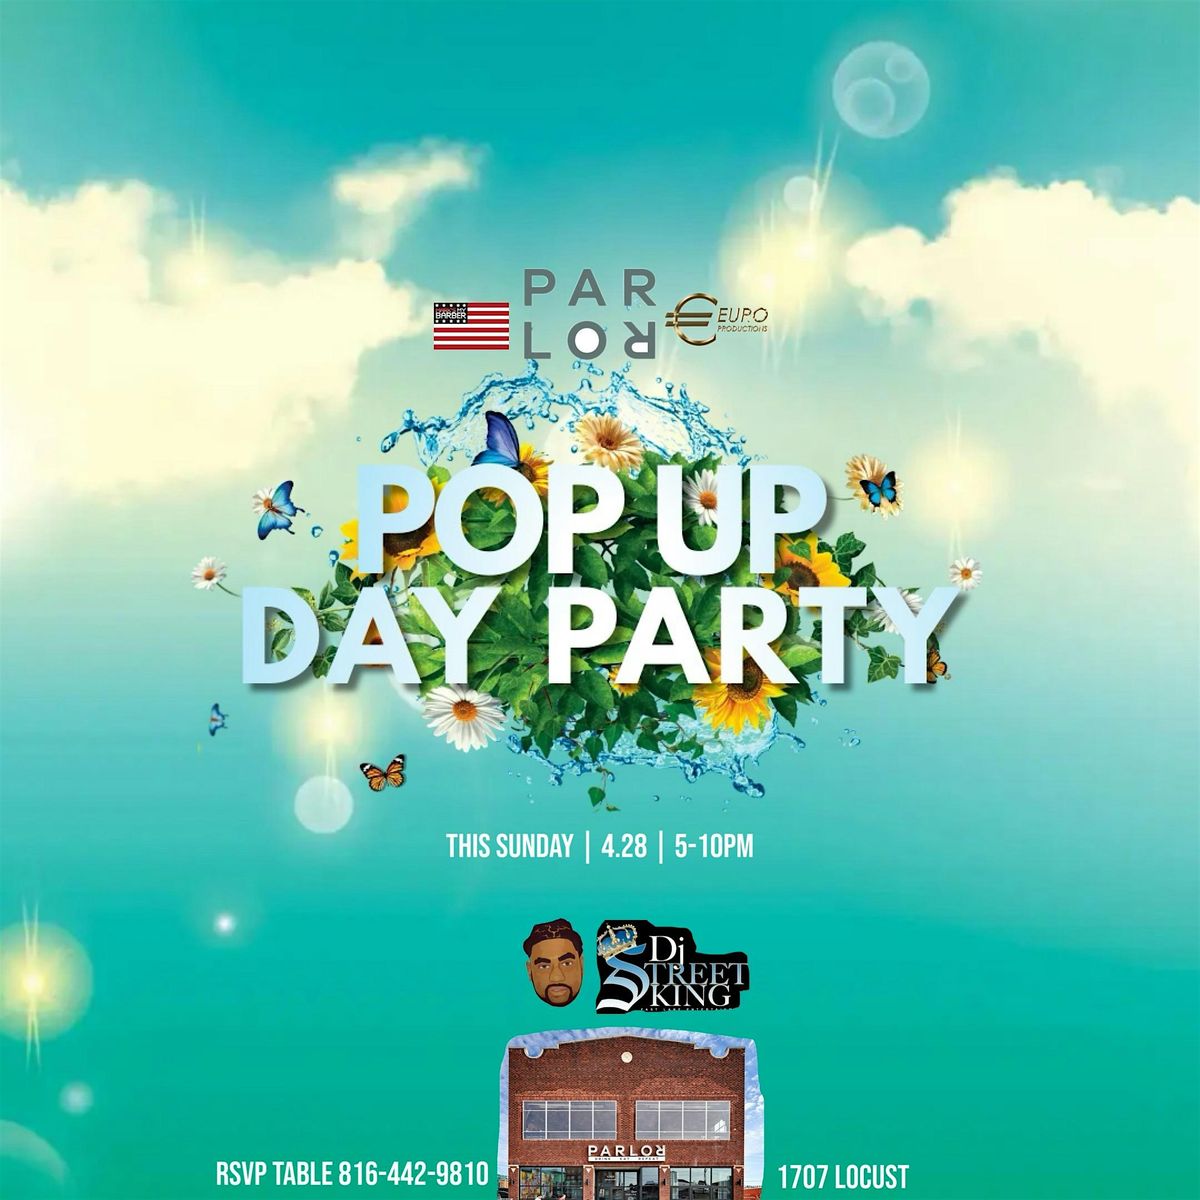 POP UP DAY PARTY